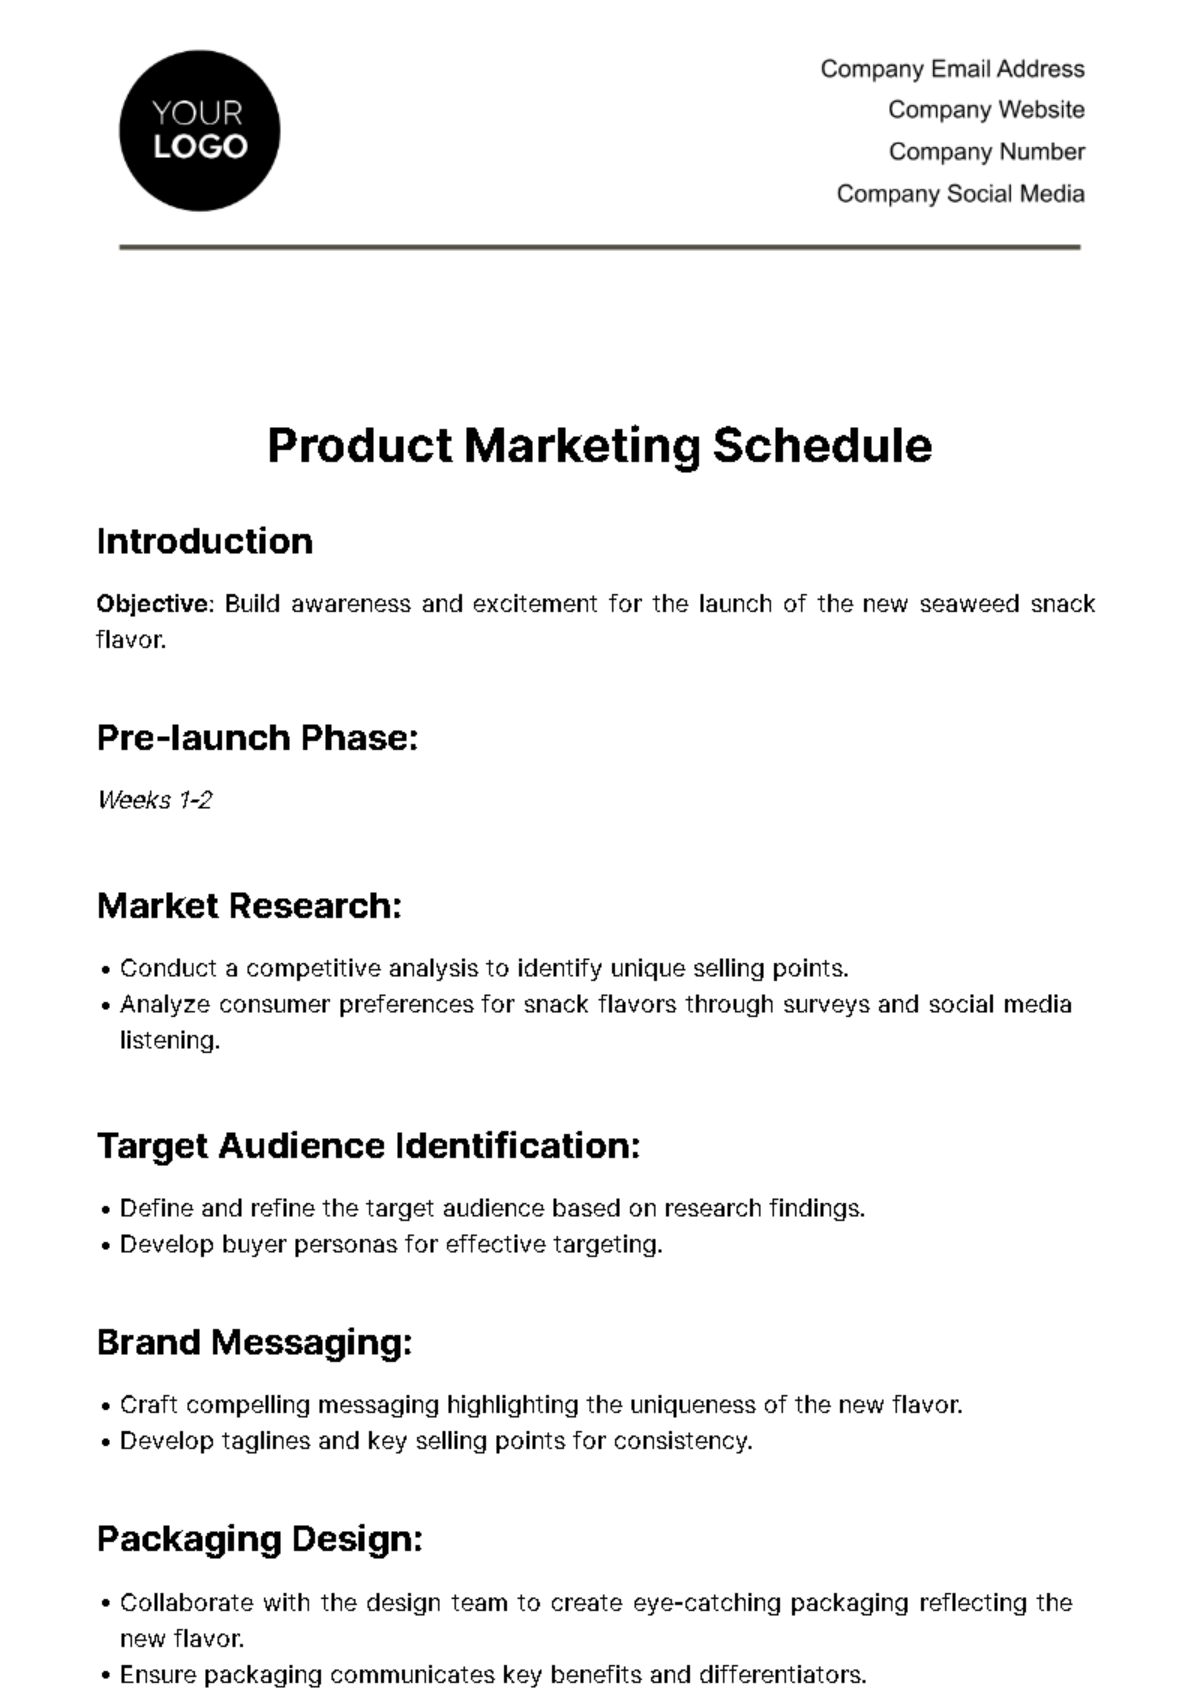 Free Product Marketing Schedule Template